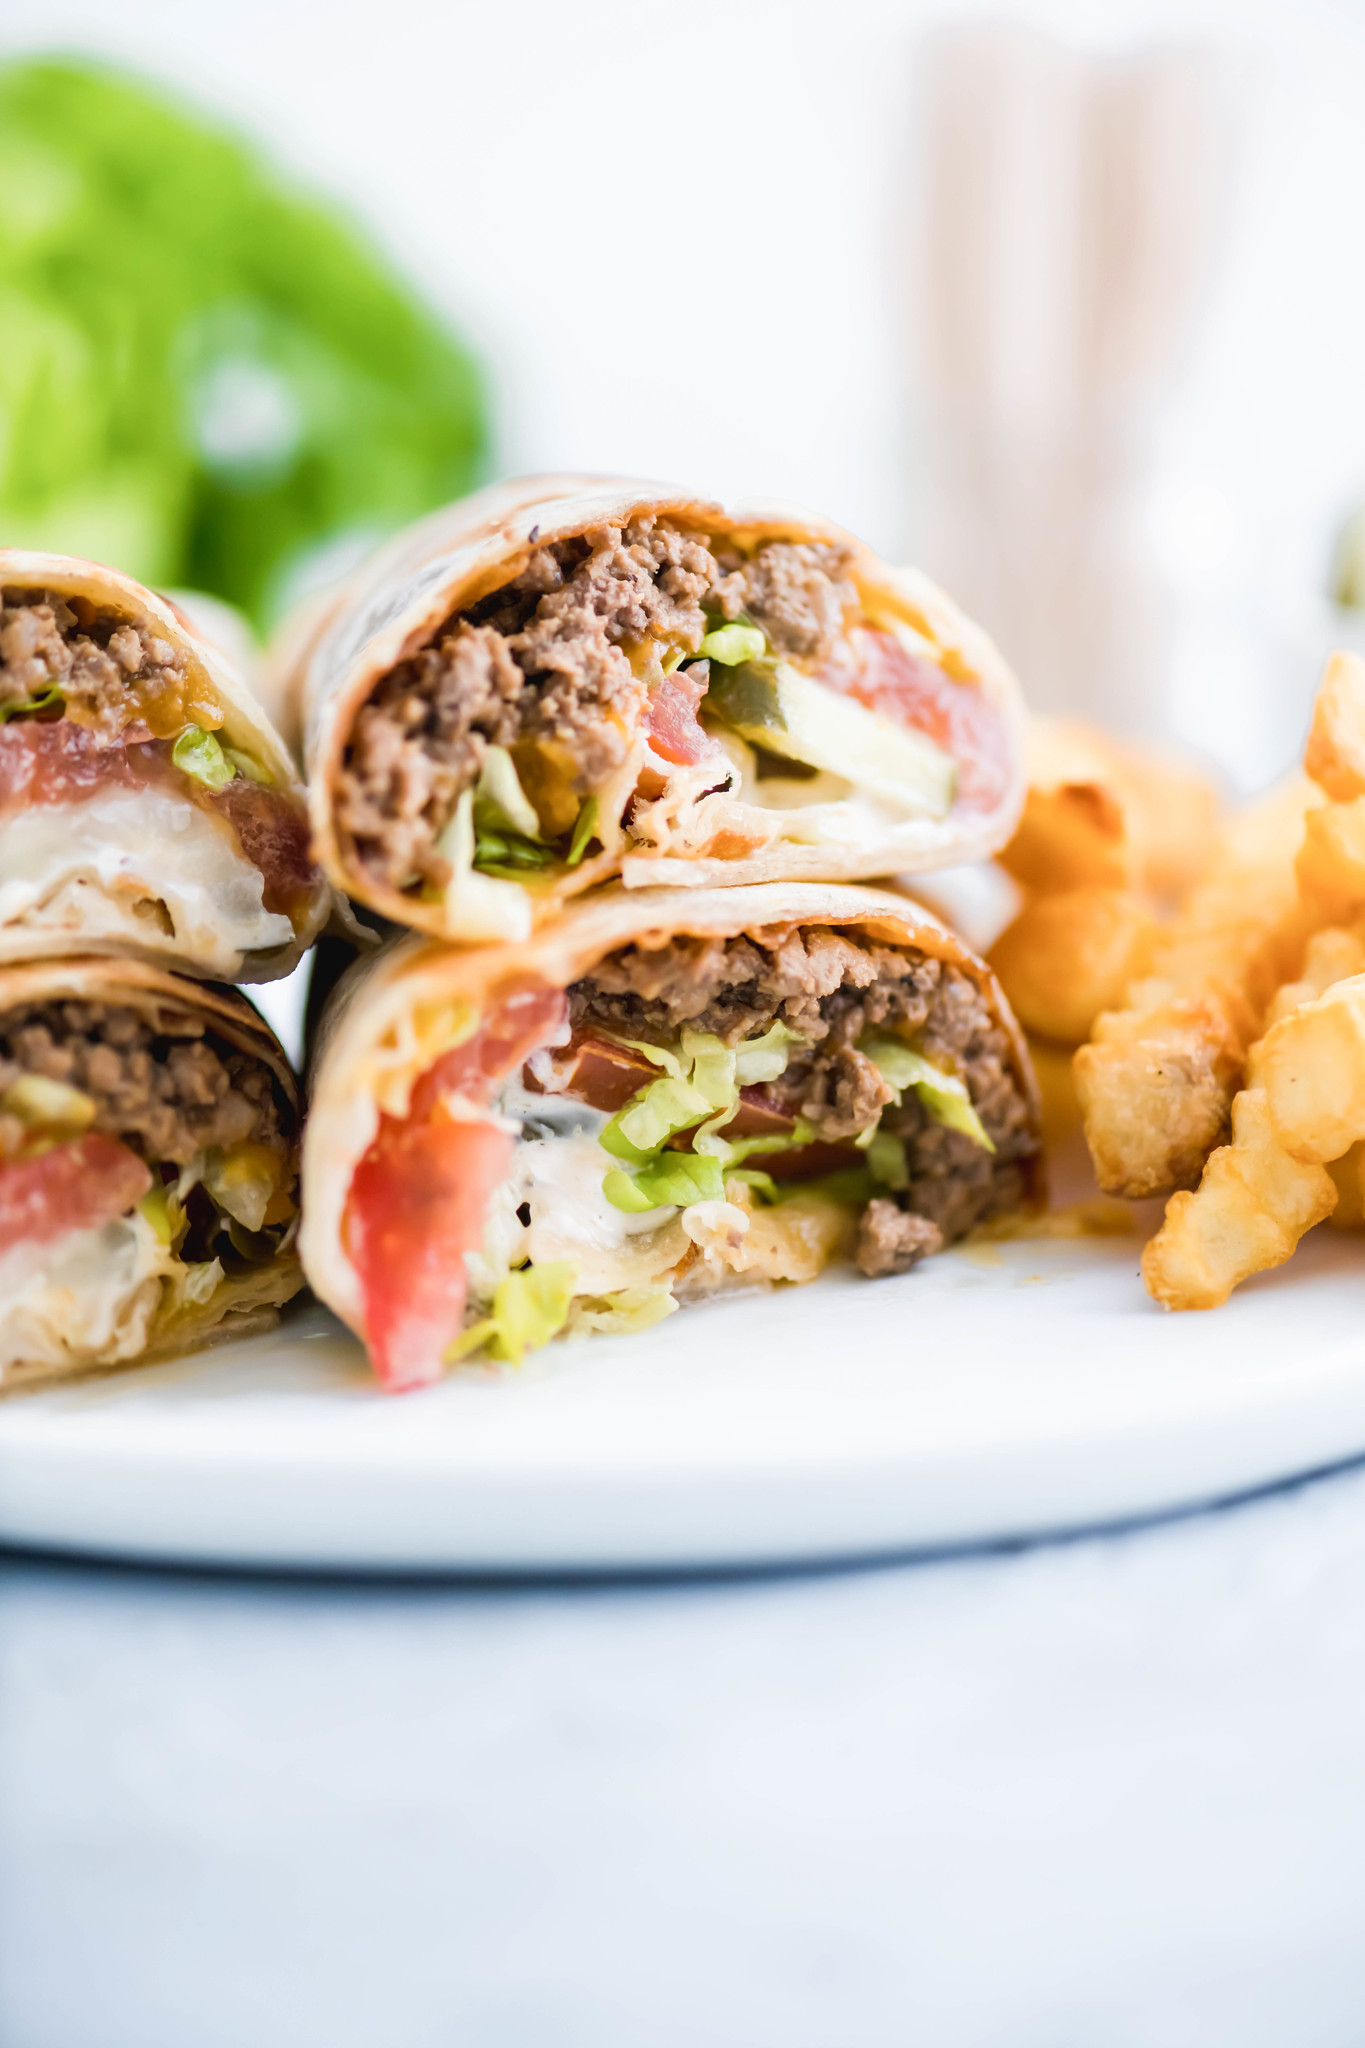 Two cheeseburger wraps cut in half and piled two on each to show interior of wrap.